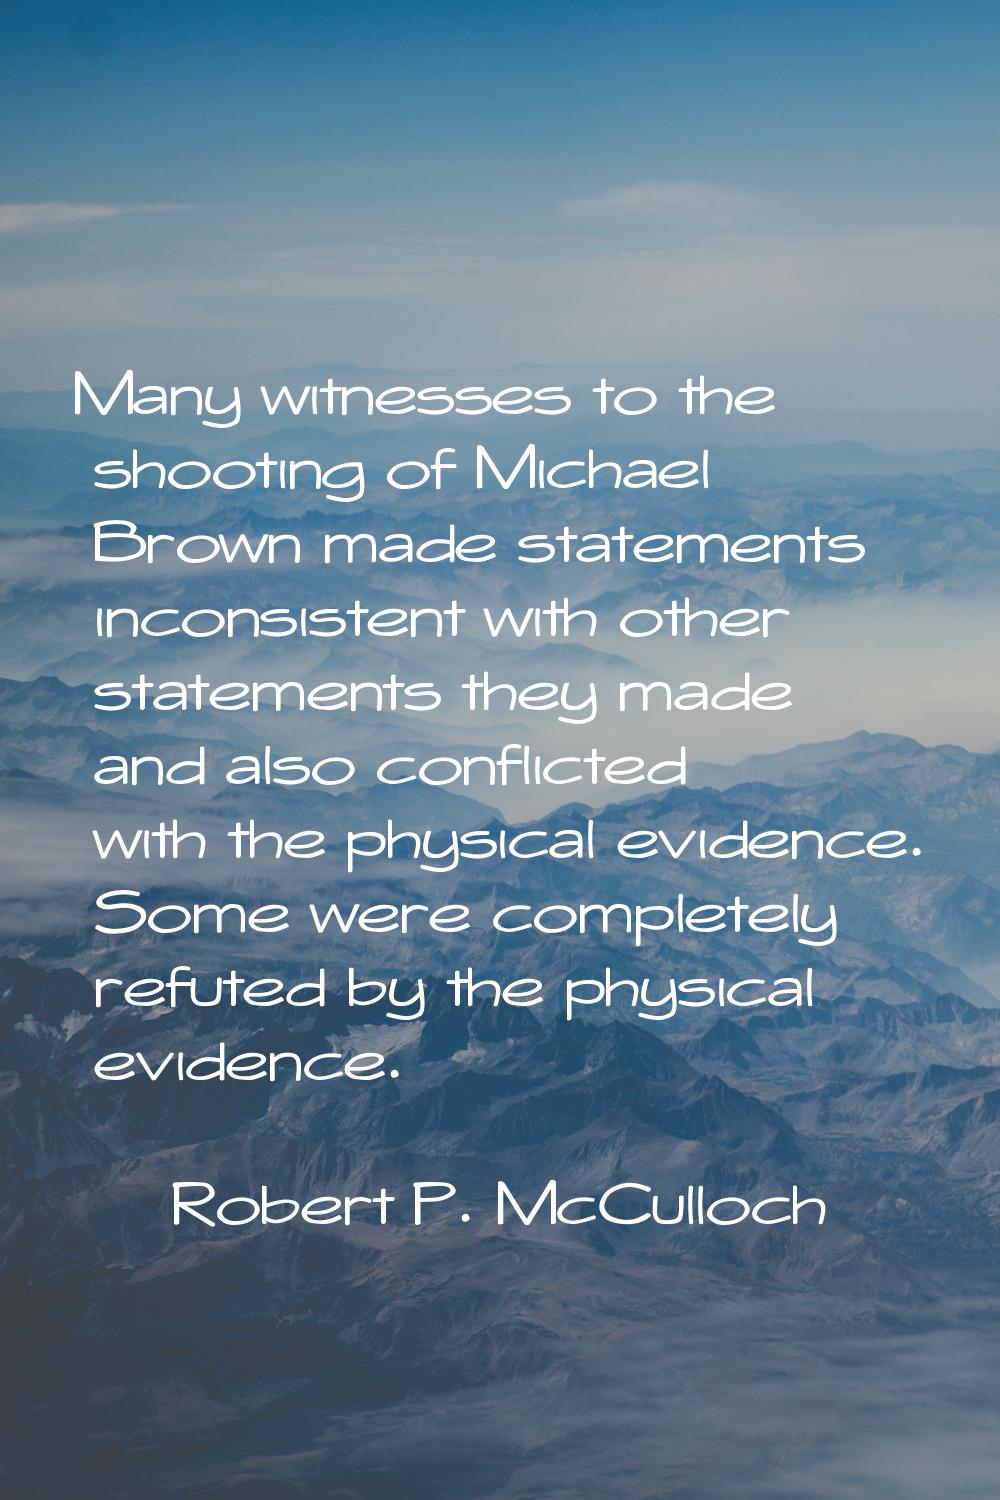 Many witnesses to the shooting of Michael Brown made statements inconsistent with other statements 